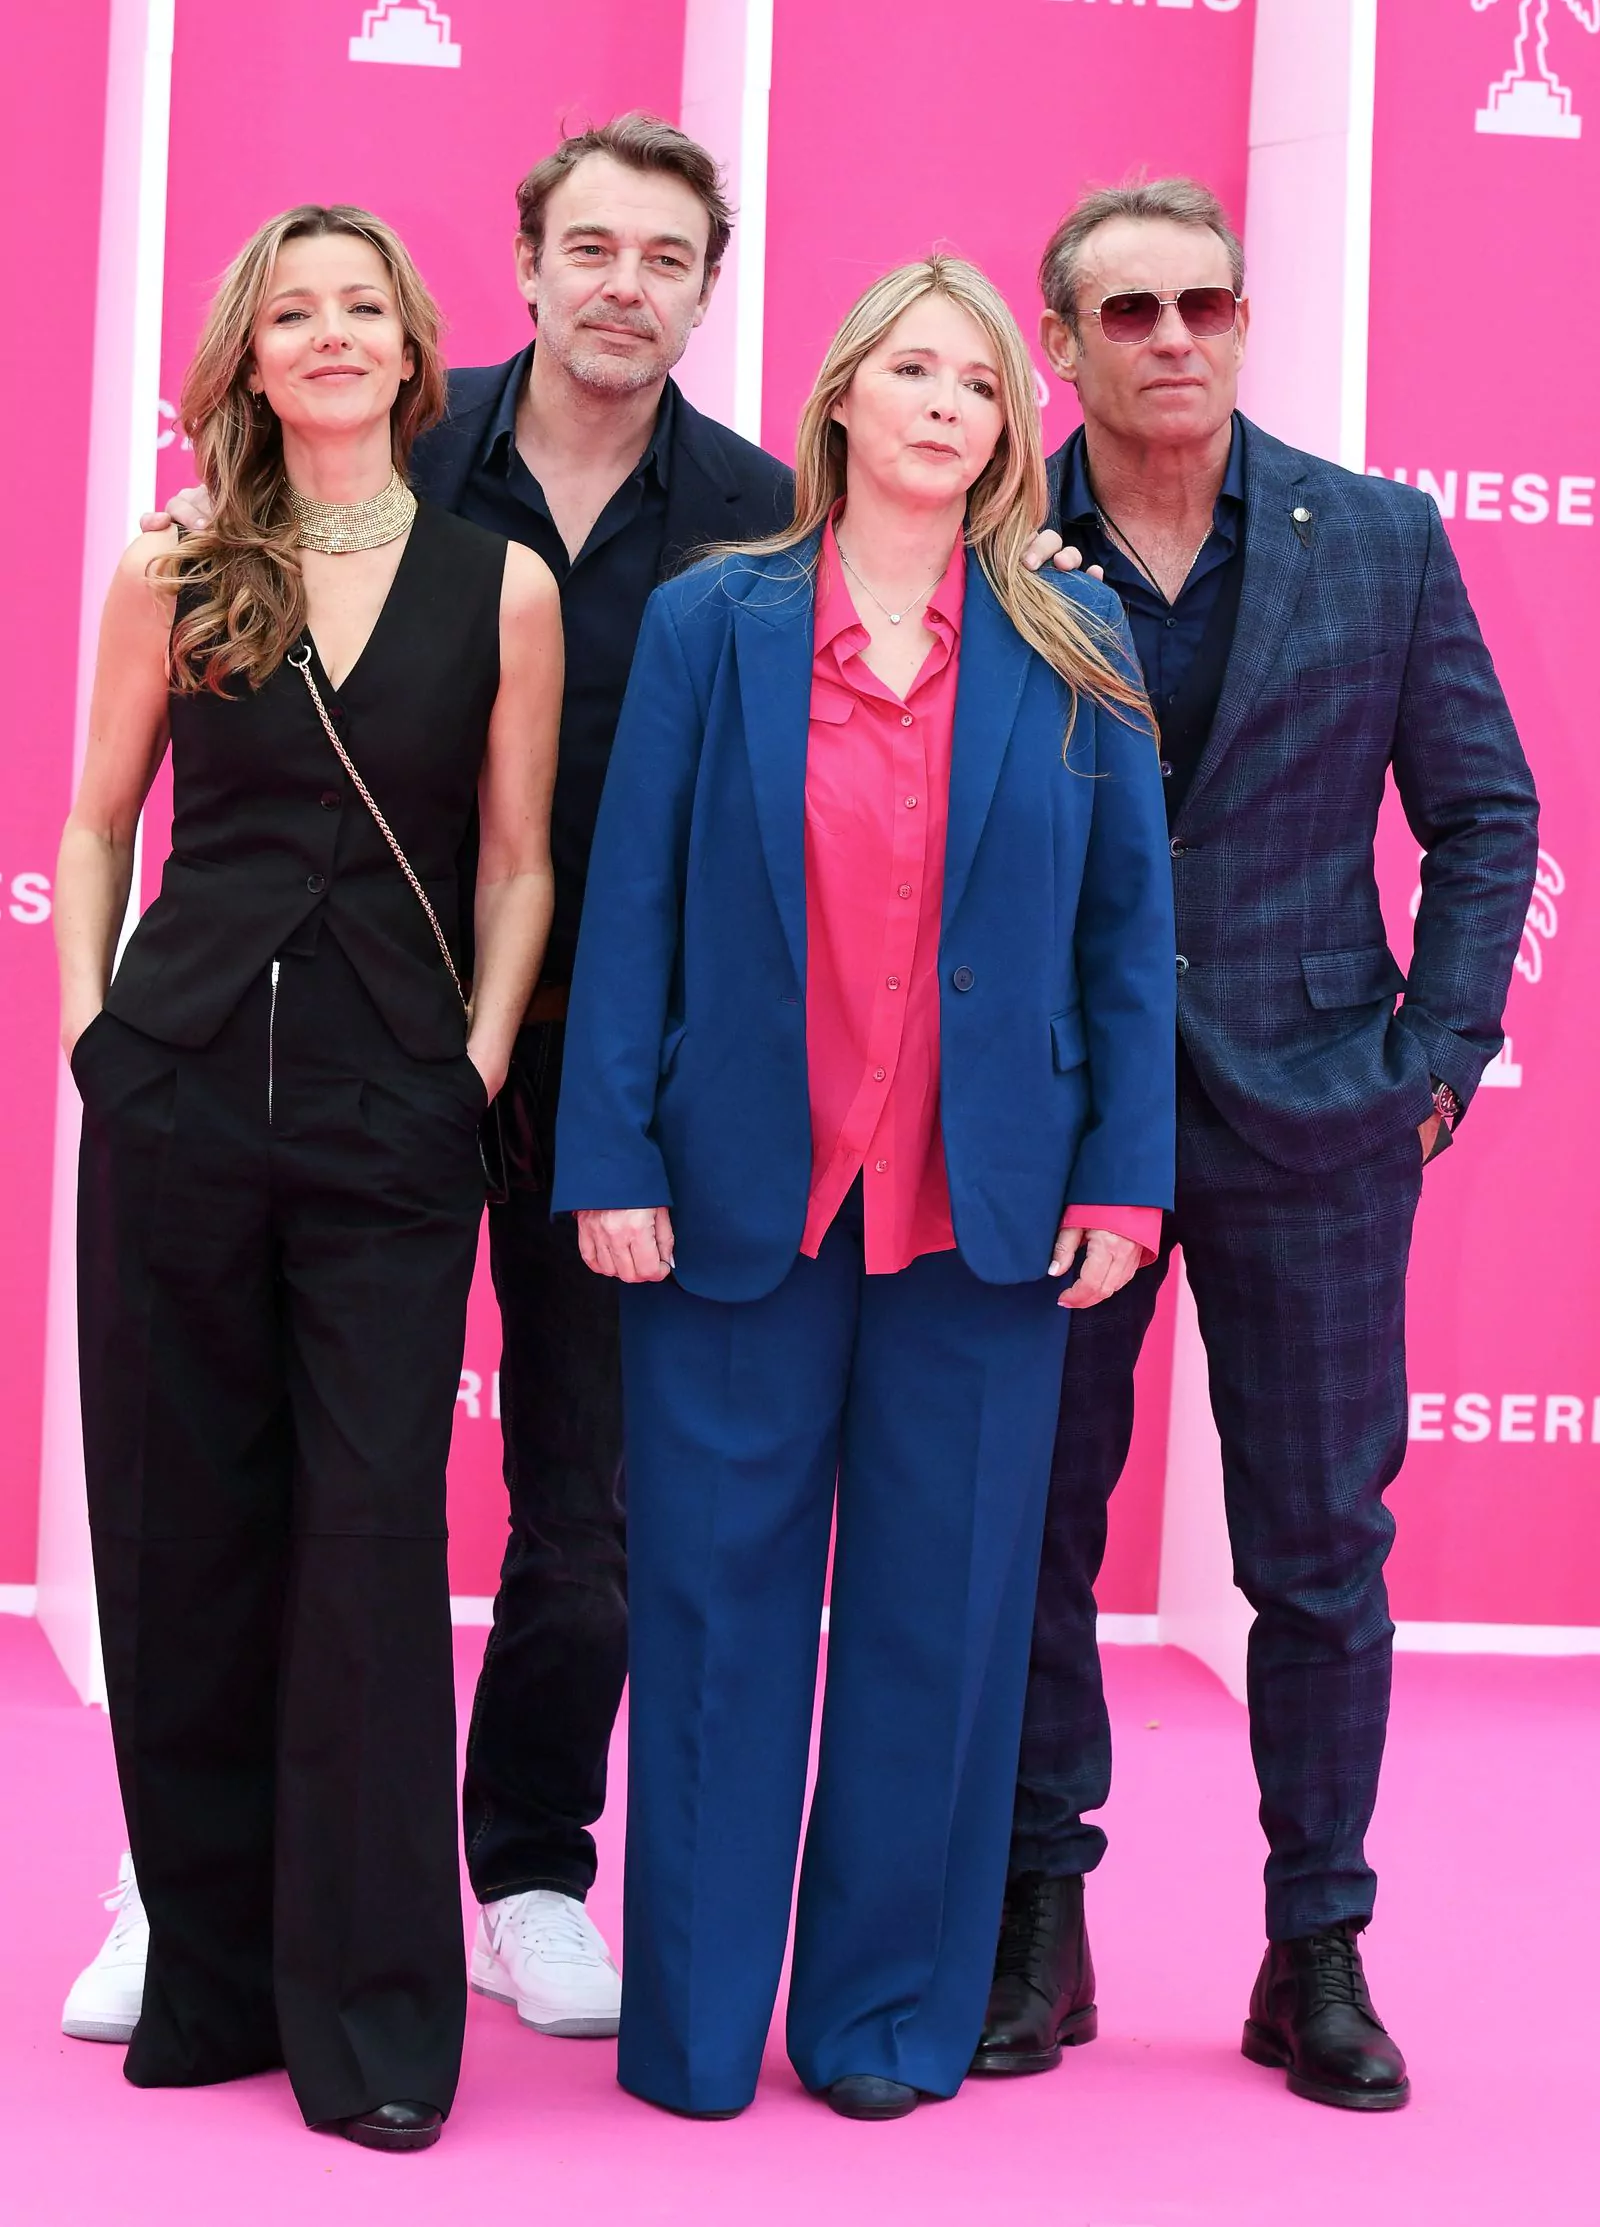 Laura Guibert, Patrick Pudebat, Hélène Rollet, Tom Schacht at the 6th Canneseries 2023 International Festival of Series in Cannes, April 14, 2023